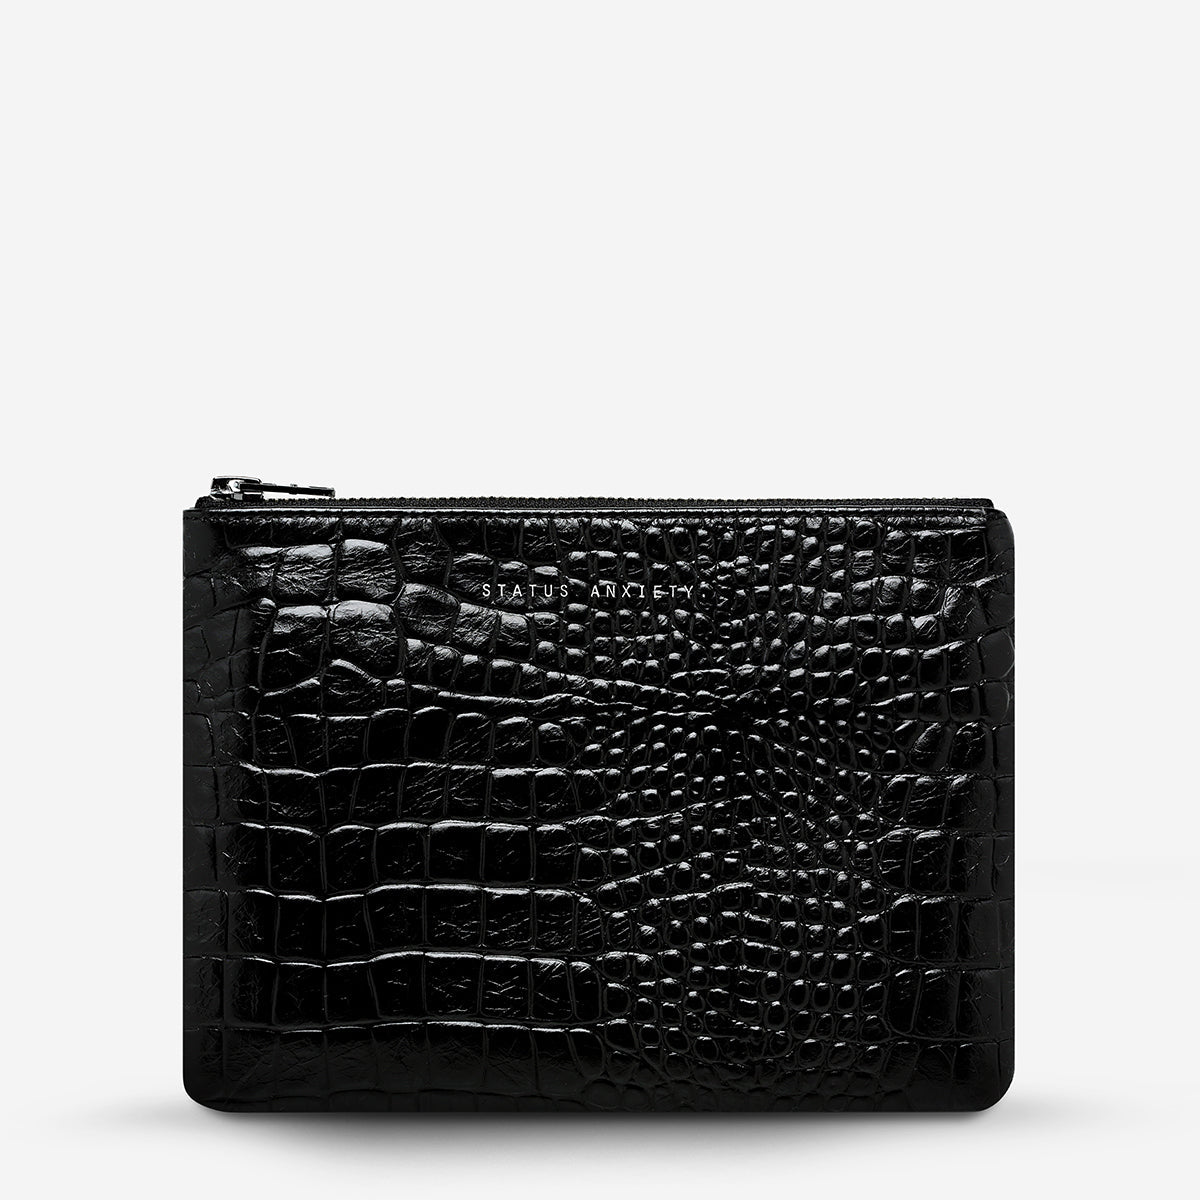 status-anxiety-wallet-new-day-black-croc-front.jpg